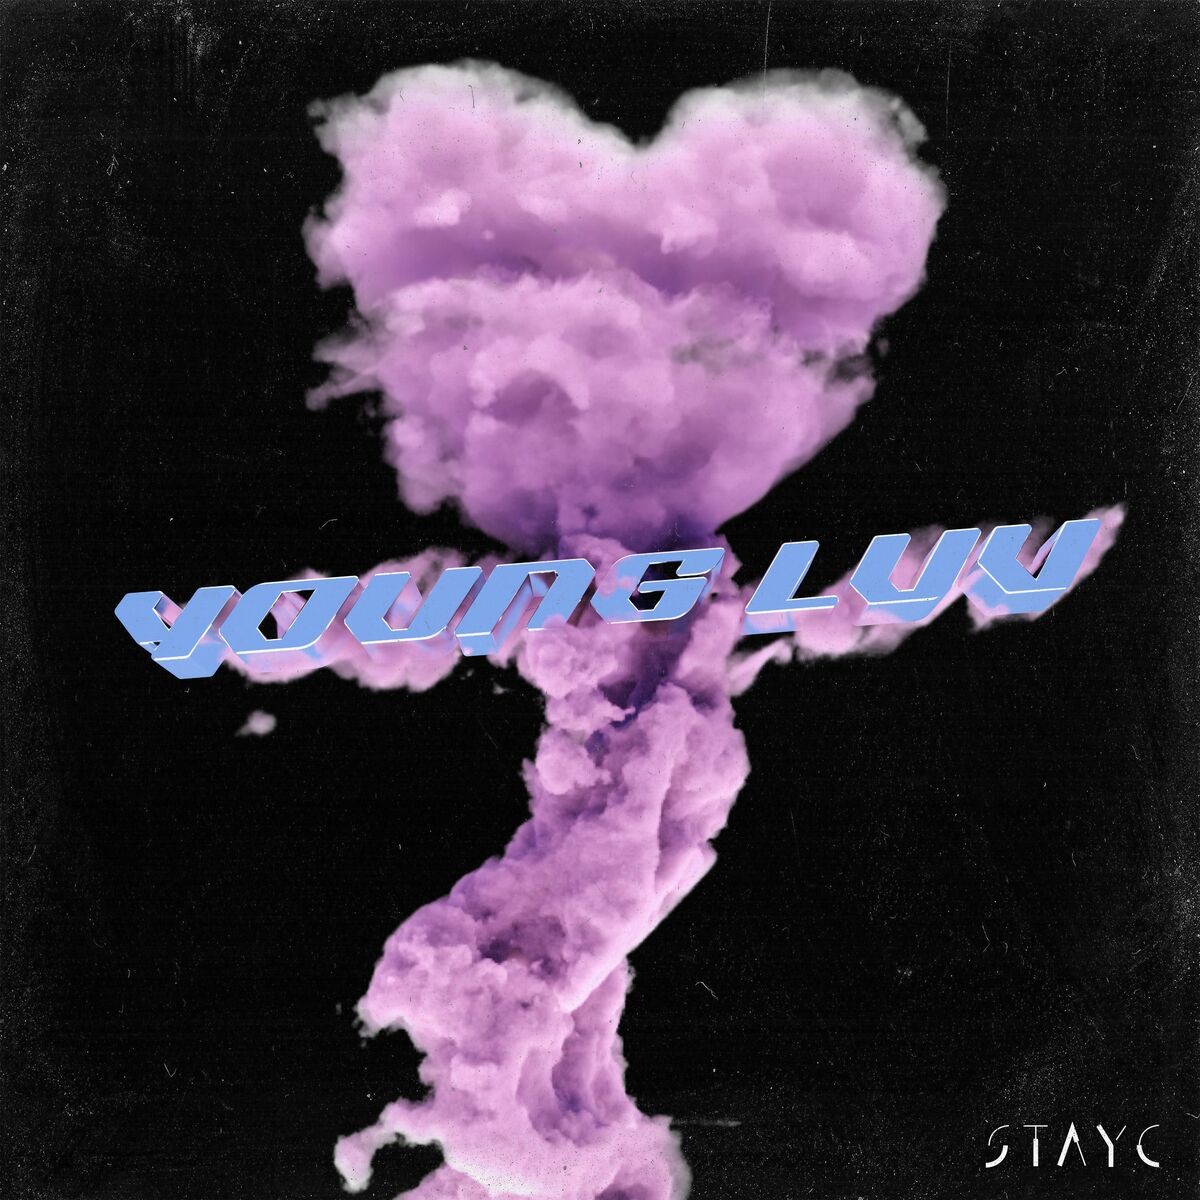 [Single] STAYC – YOUNG-LUV.COM [24bit Lossless + MP3 320 / WEB] [2022.02.21]